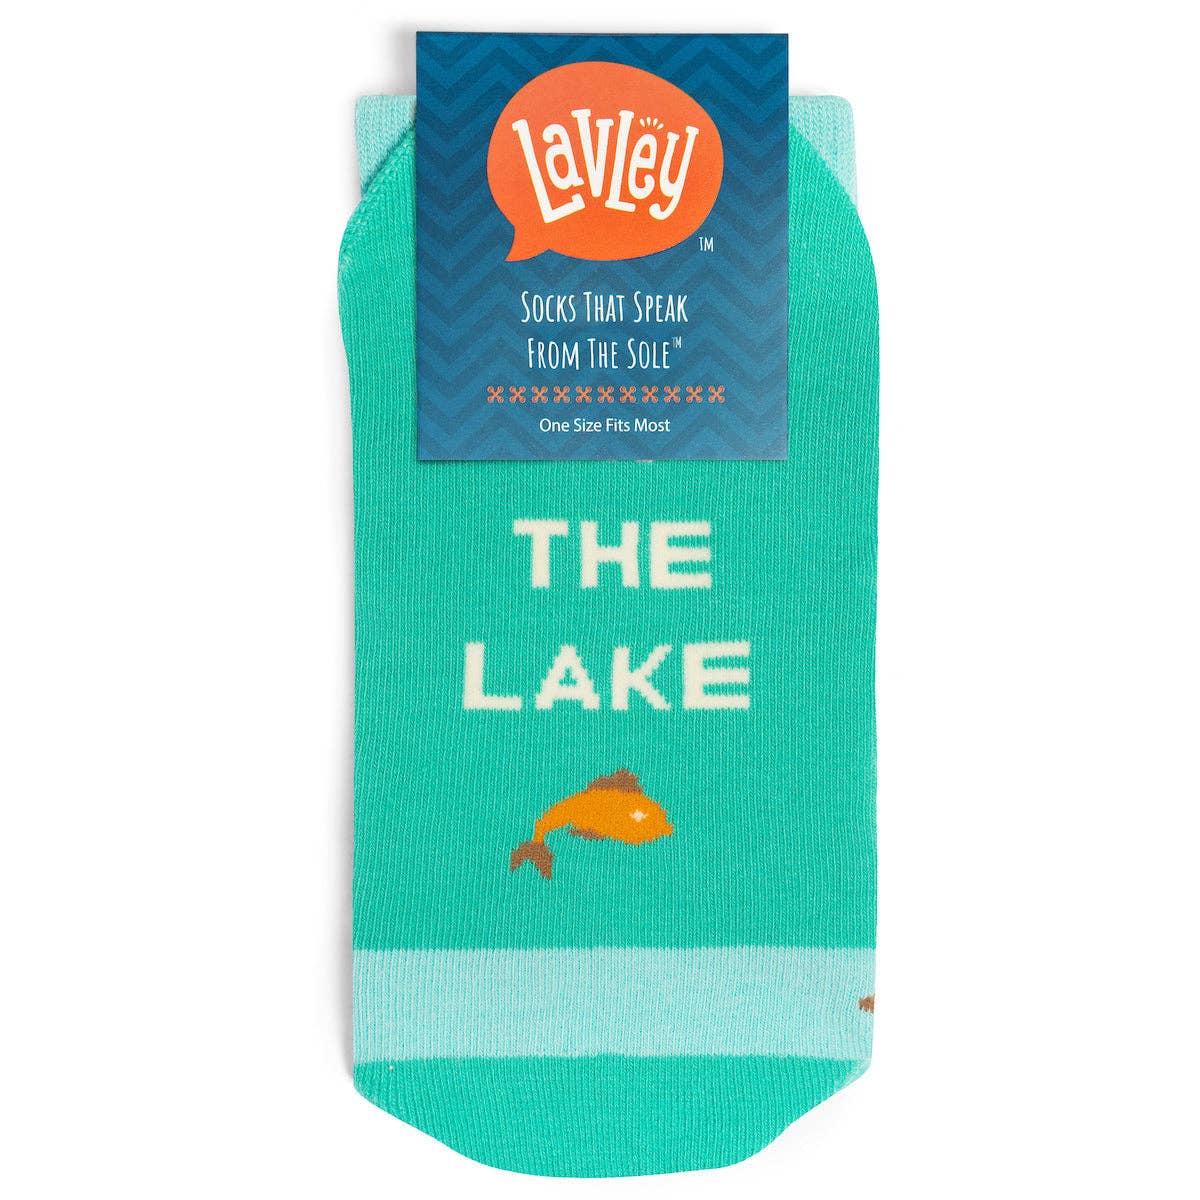 Lavley - I'd Rather Be At The Lake Socks